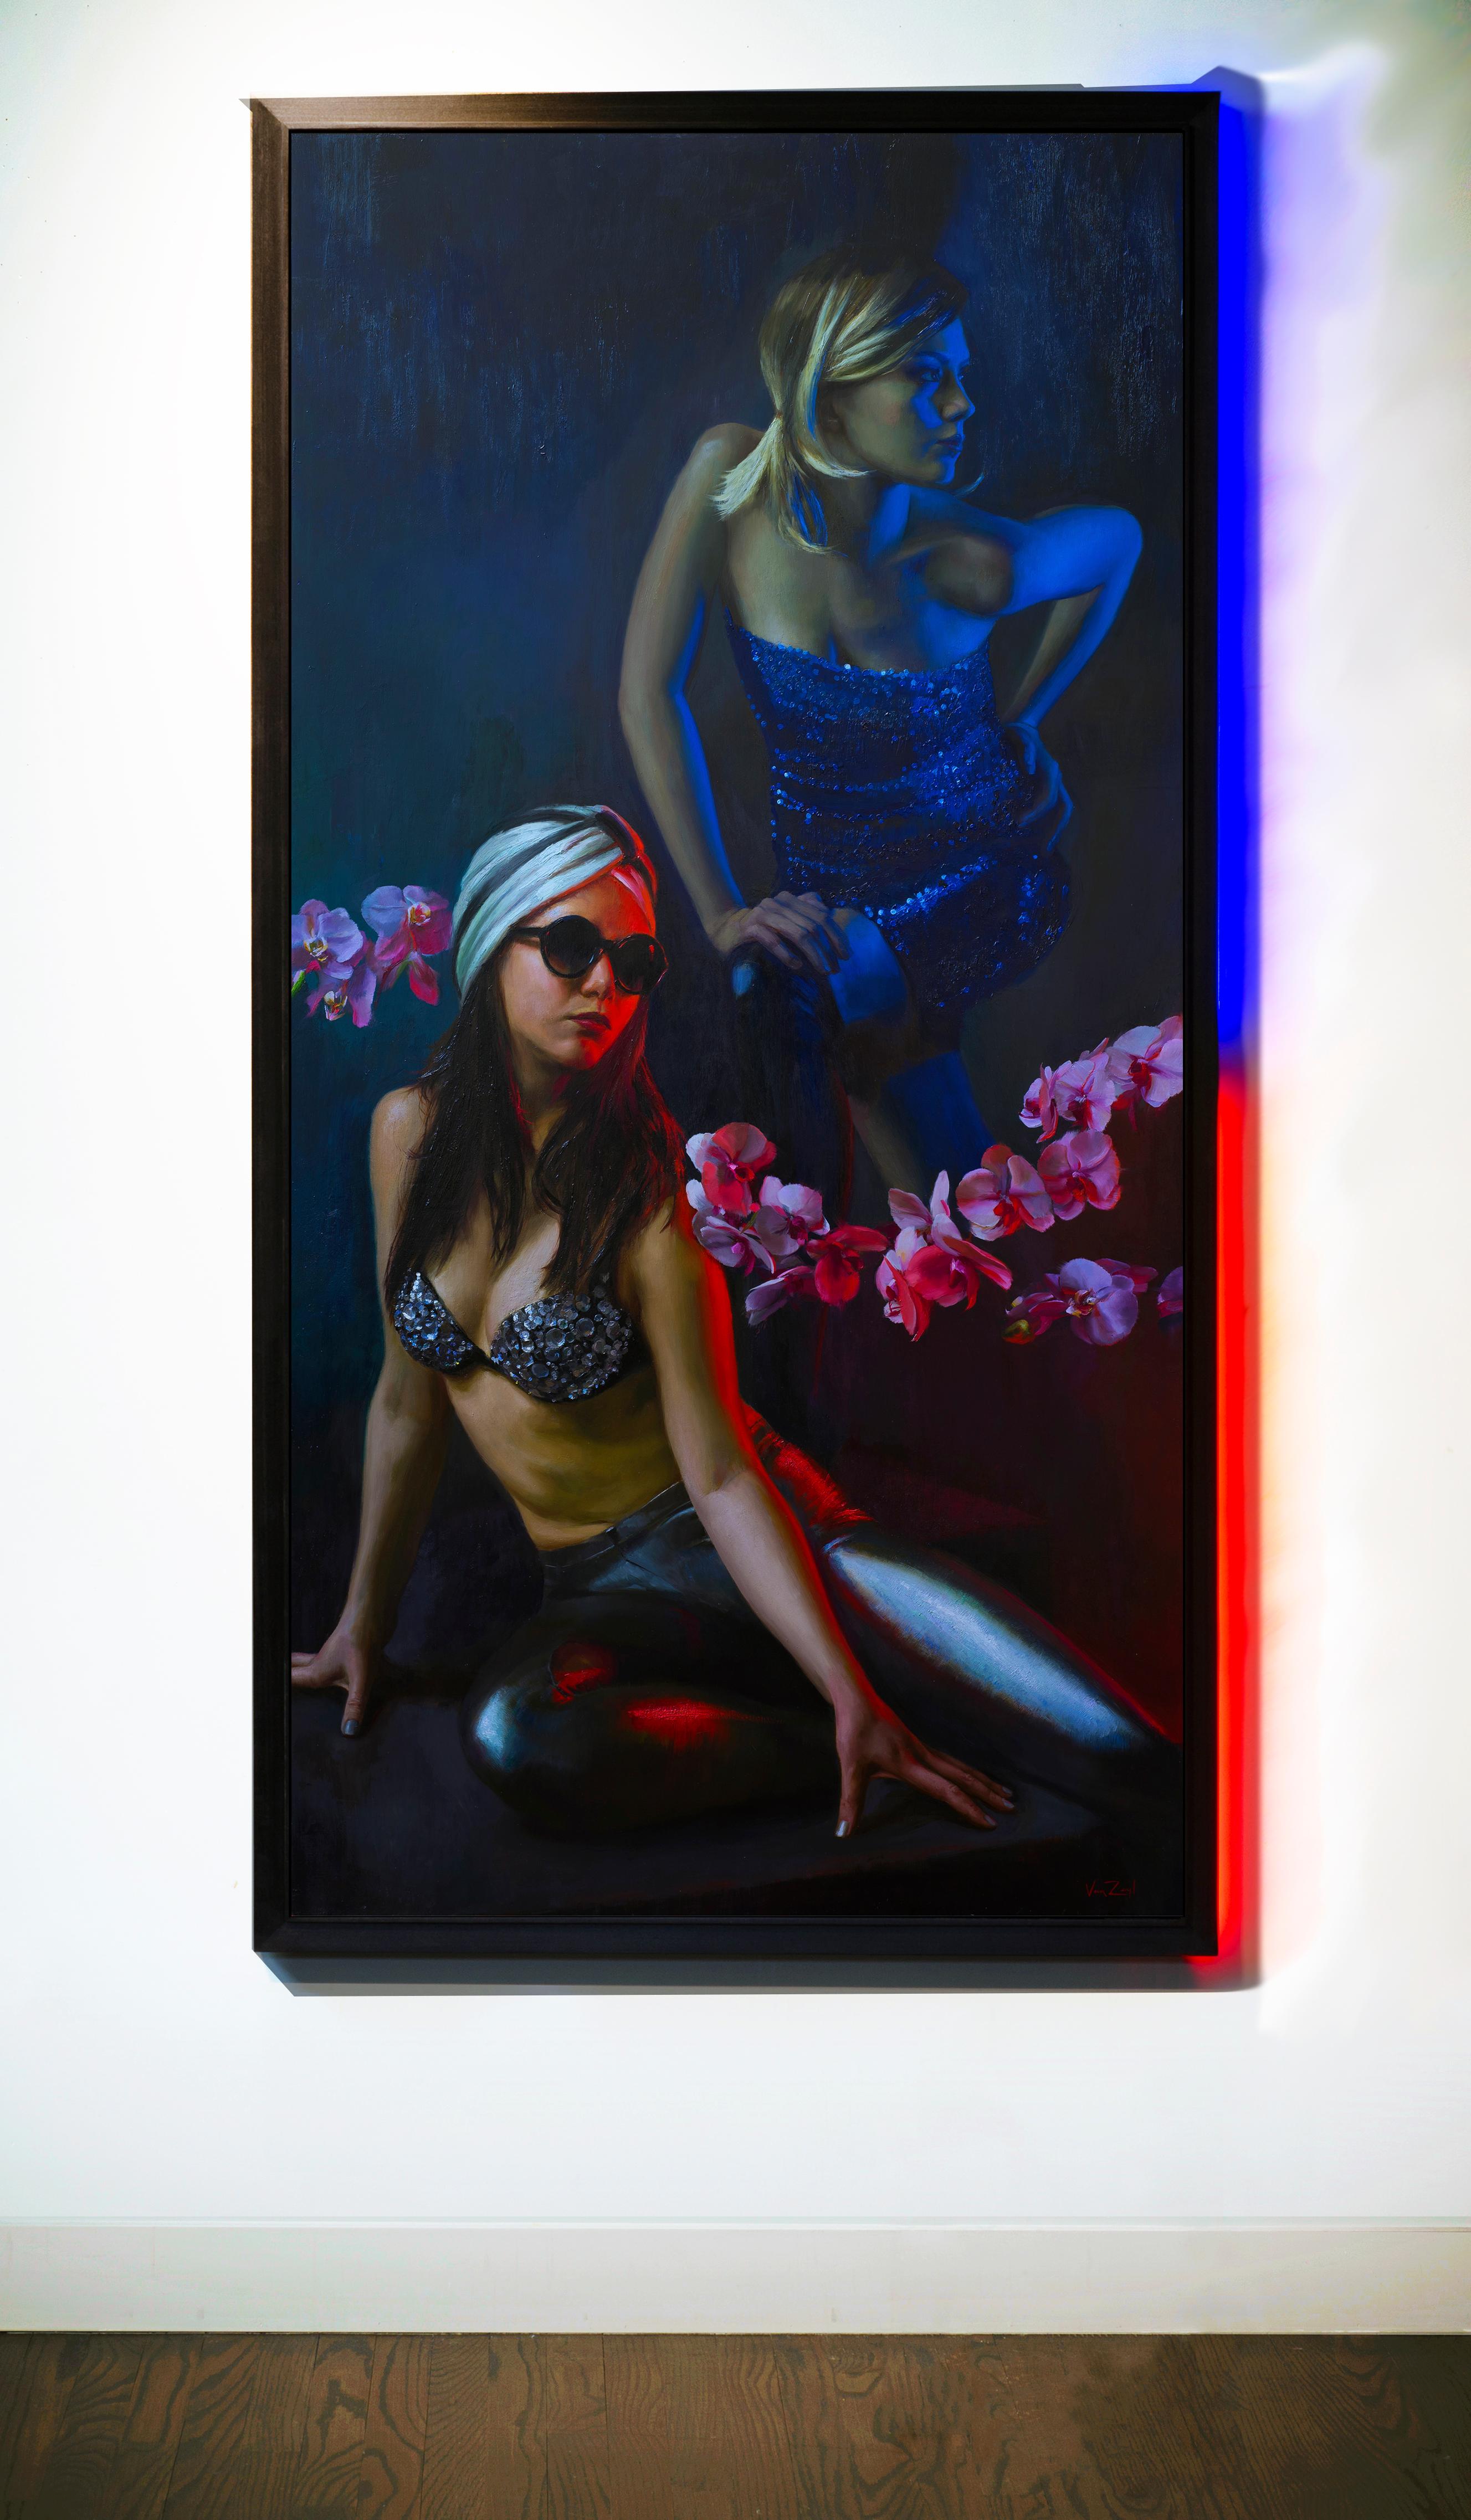 Orchid Electra - Original Oil Painting of Two Women in Lush Blue and Red Light